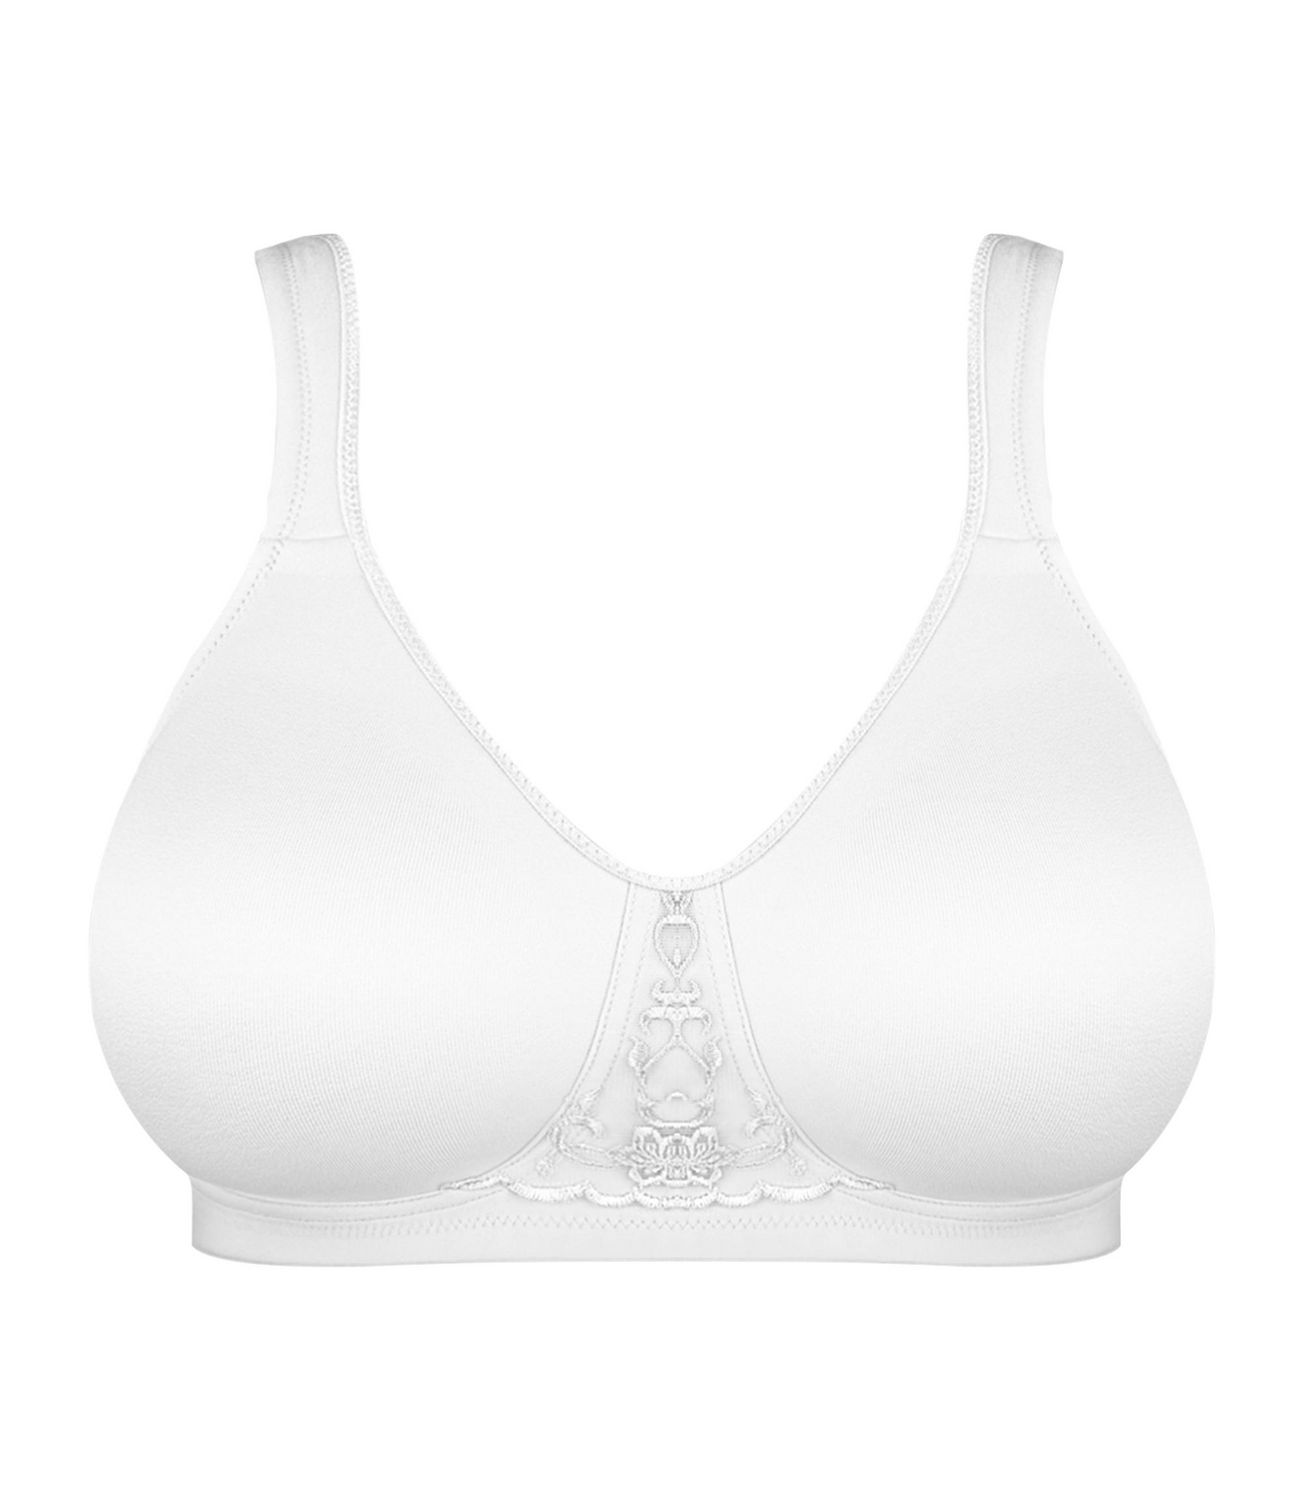 Buy KD Women's Non Wired Full Cup Covered TIPTOP Bra - White, Pack